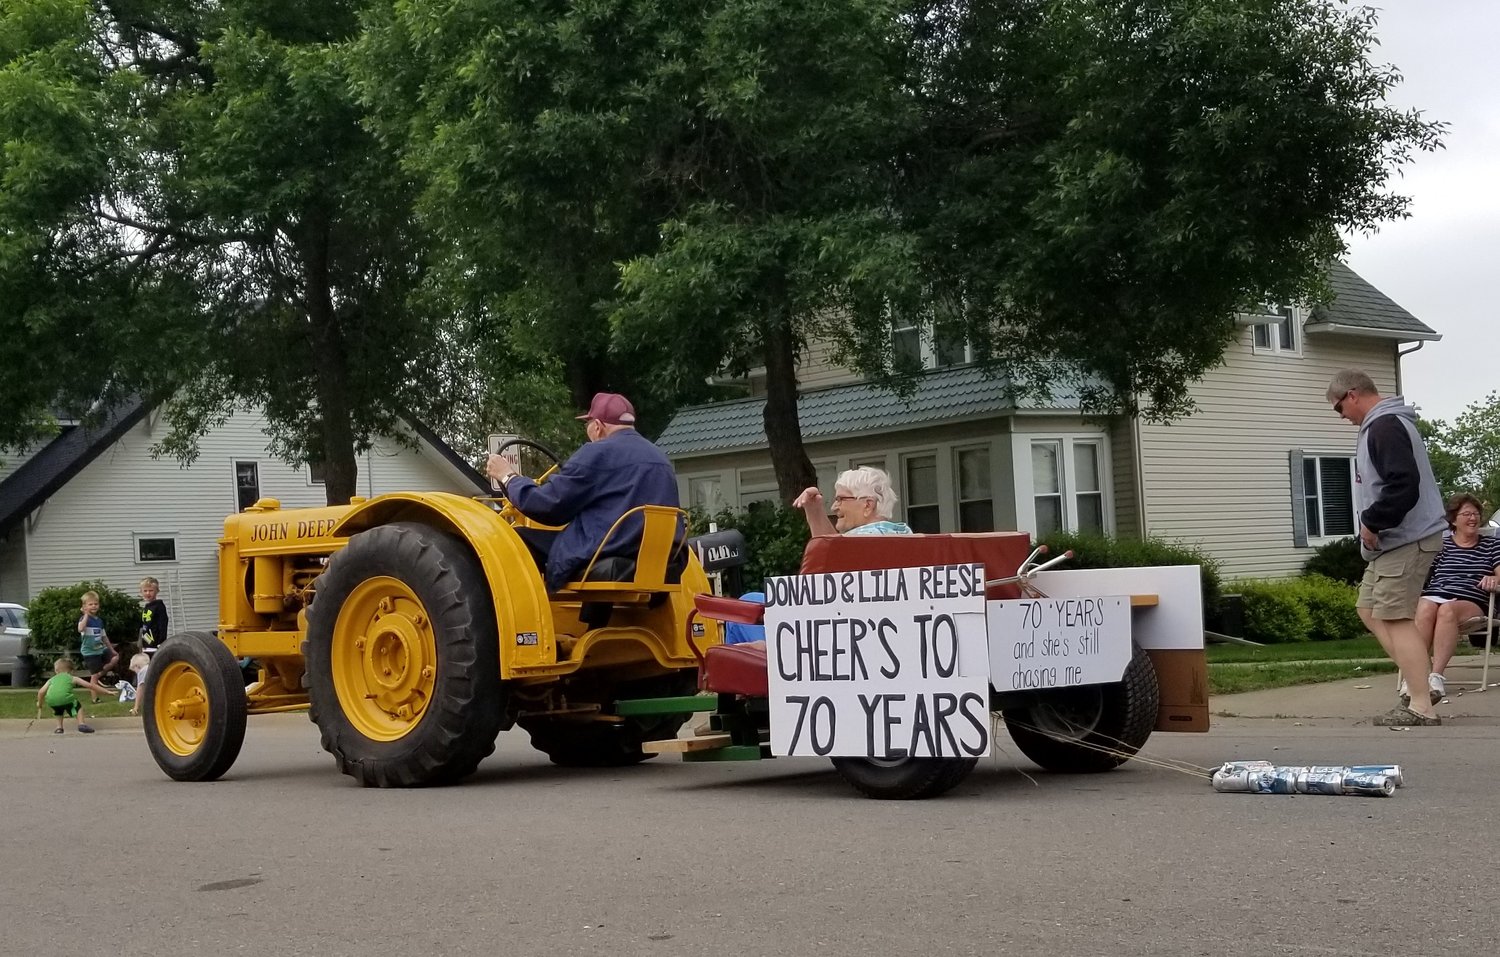 95 year-old Donald Reese drives his John Deere tractor towing a cart carrying his wife, Lila.  The Volksfest parade entry was in honor of their 70th wedding anniversary and the sign on the back said, "70 Years and she's still chasing me". 